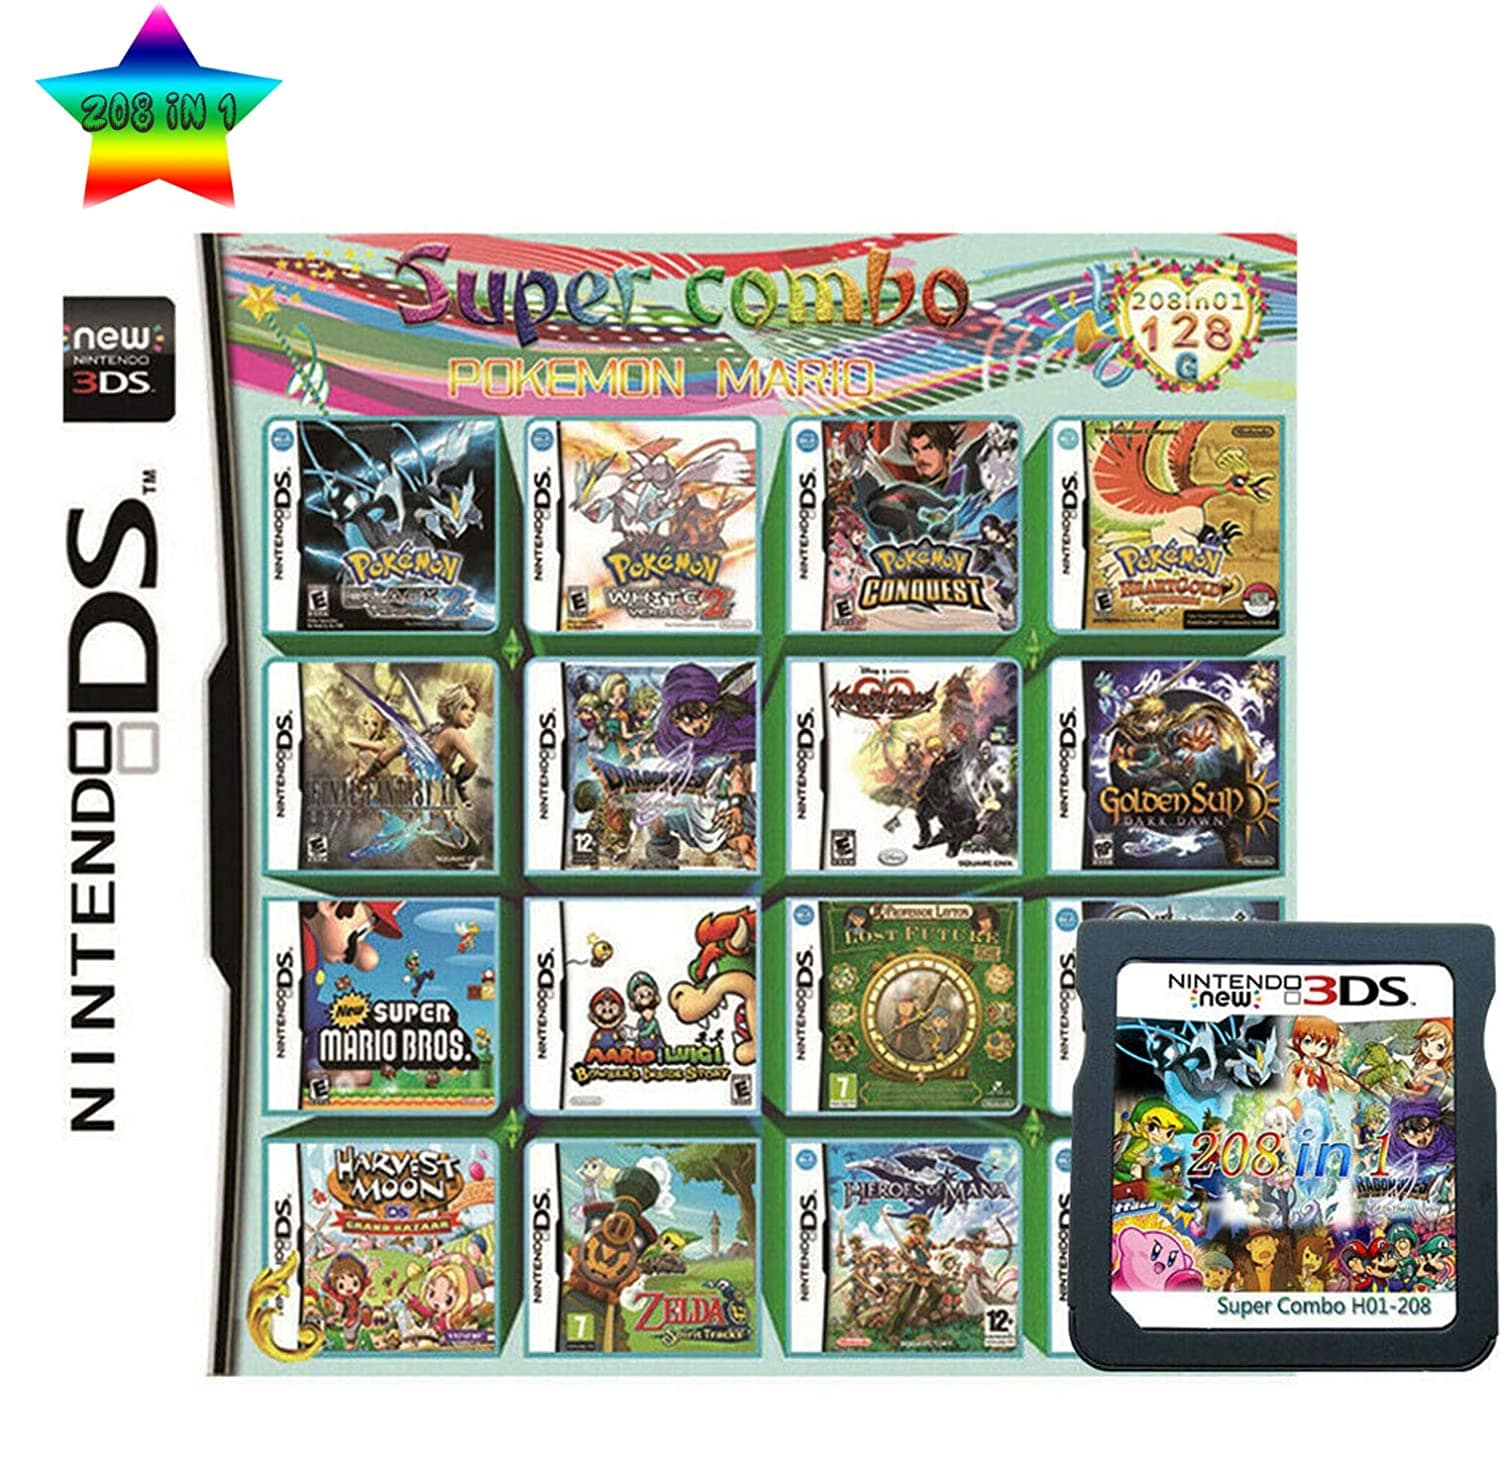 Buy 208 In 1 Video Game Compilation For Nintendo DS/3DS/2DS Console Nintendo 3DS - Cheap - G2A.COM!